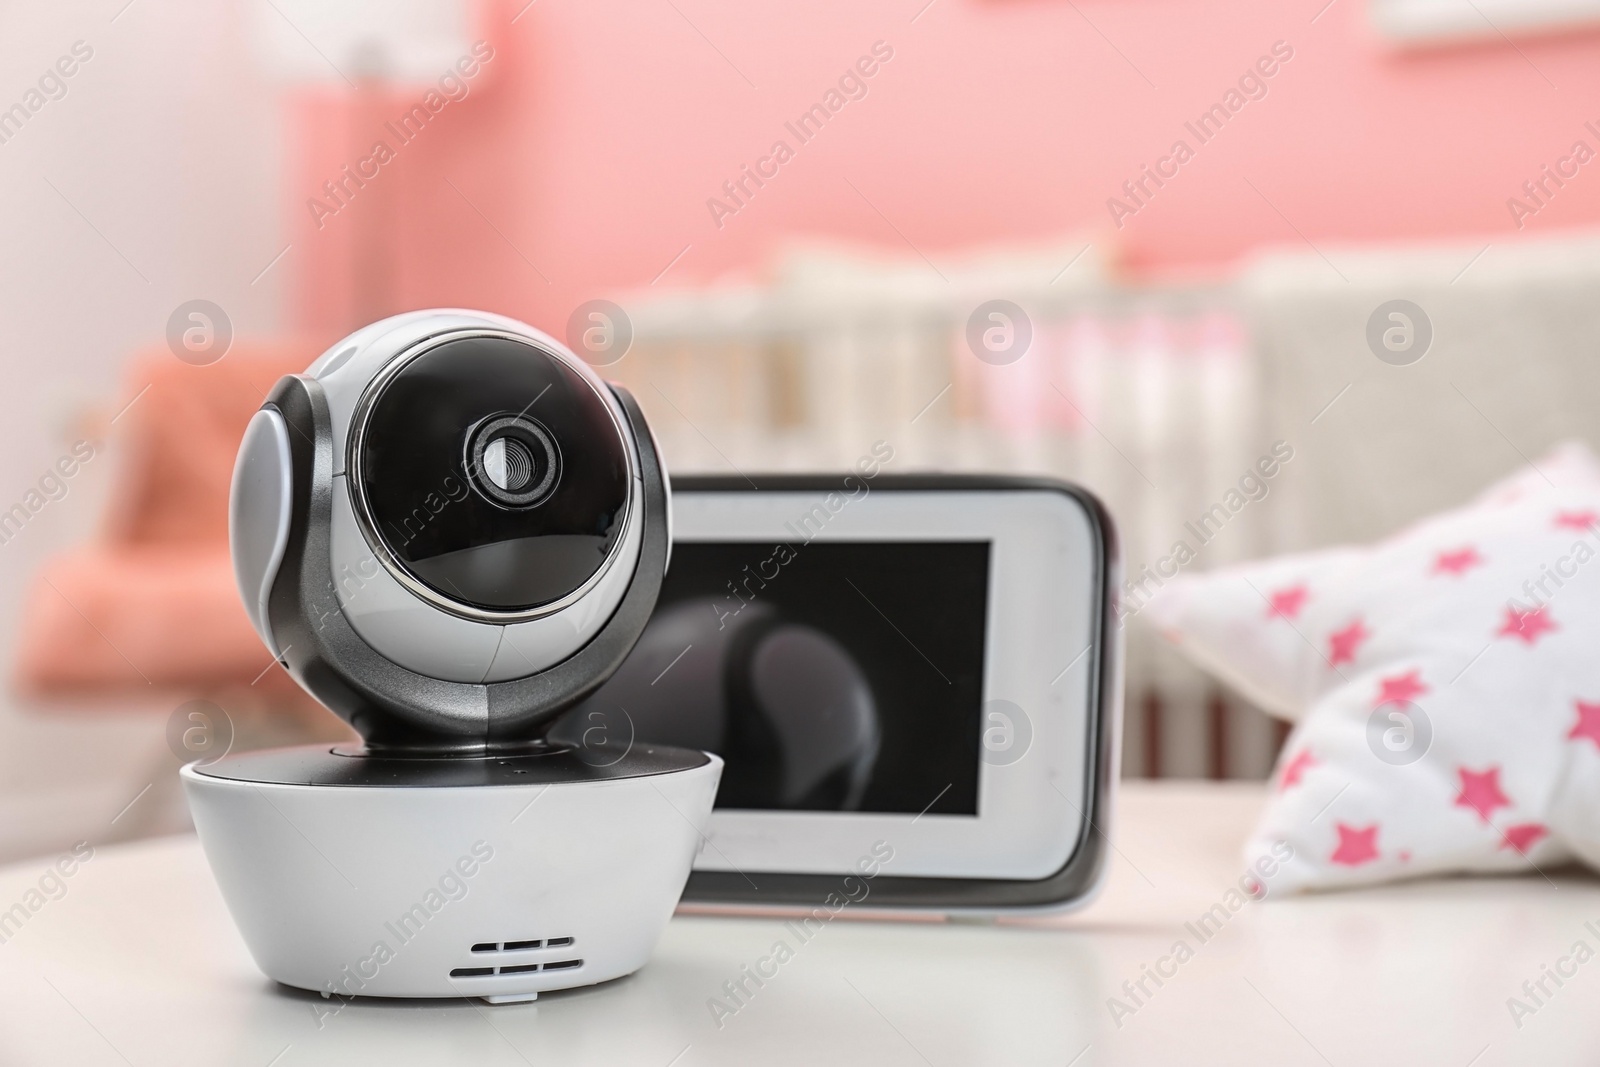 Photo of Baby monitors on table in room. CCTV equipment